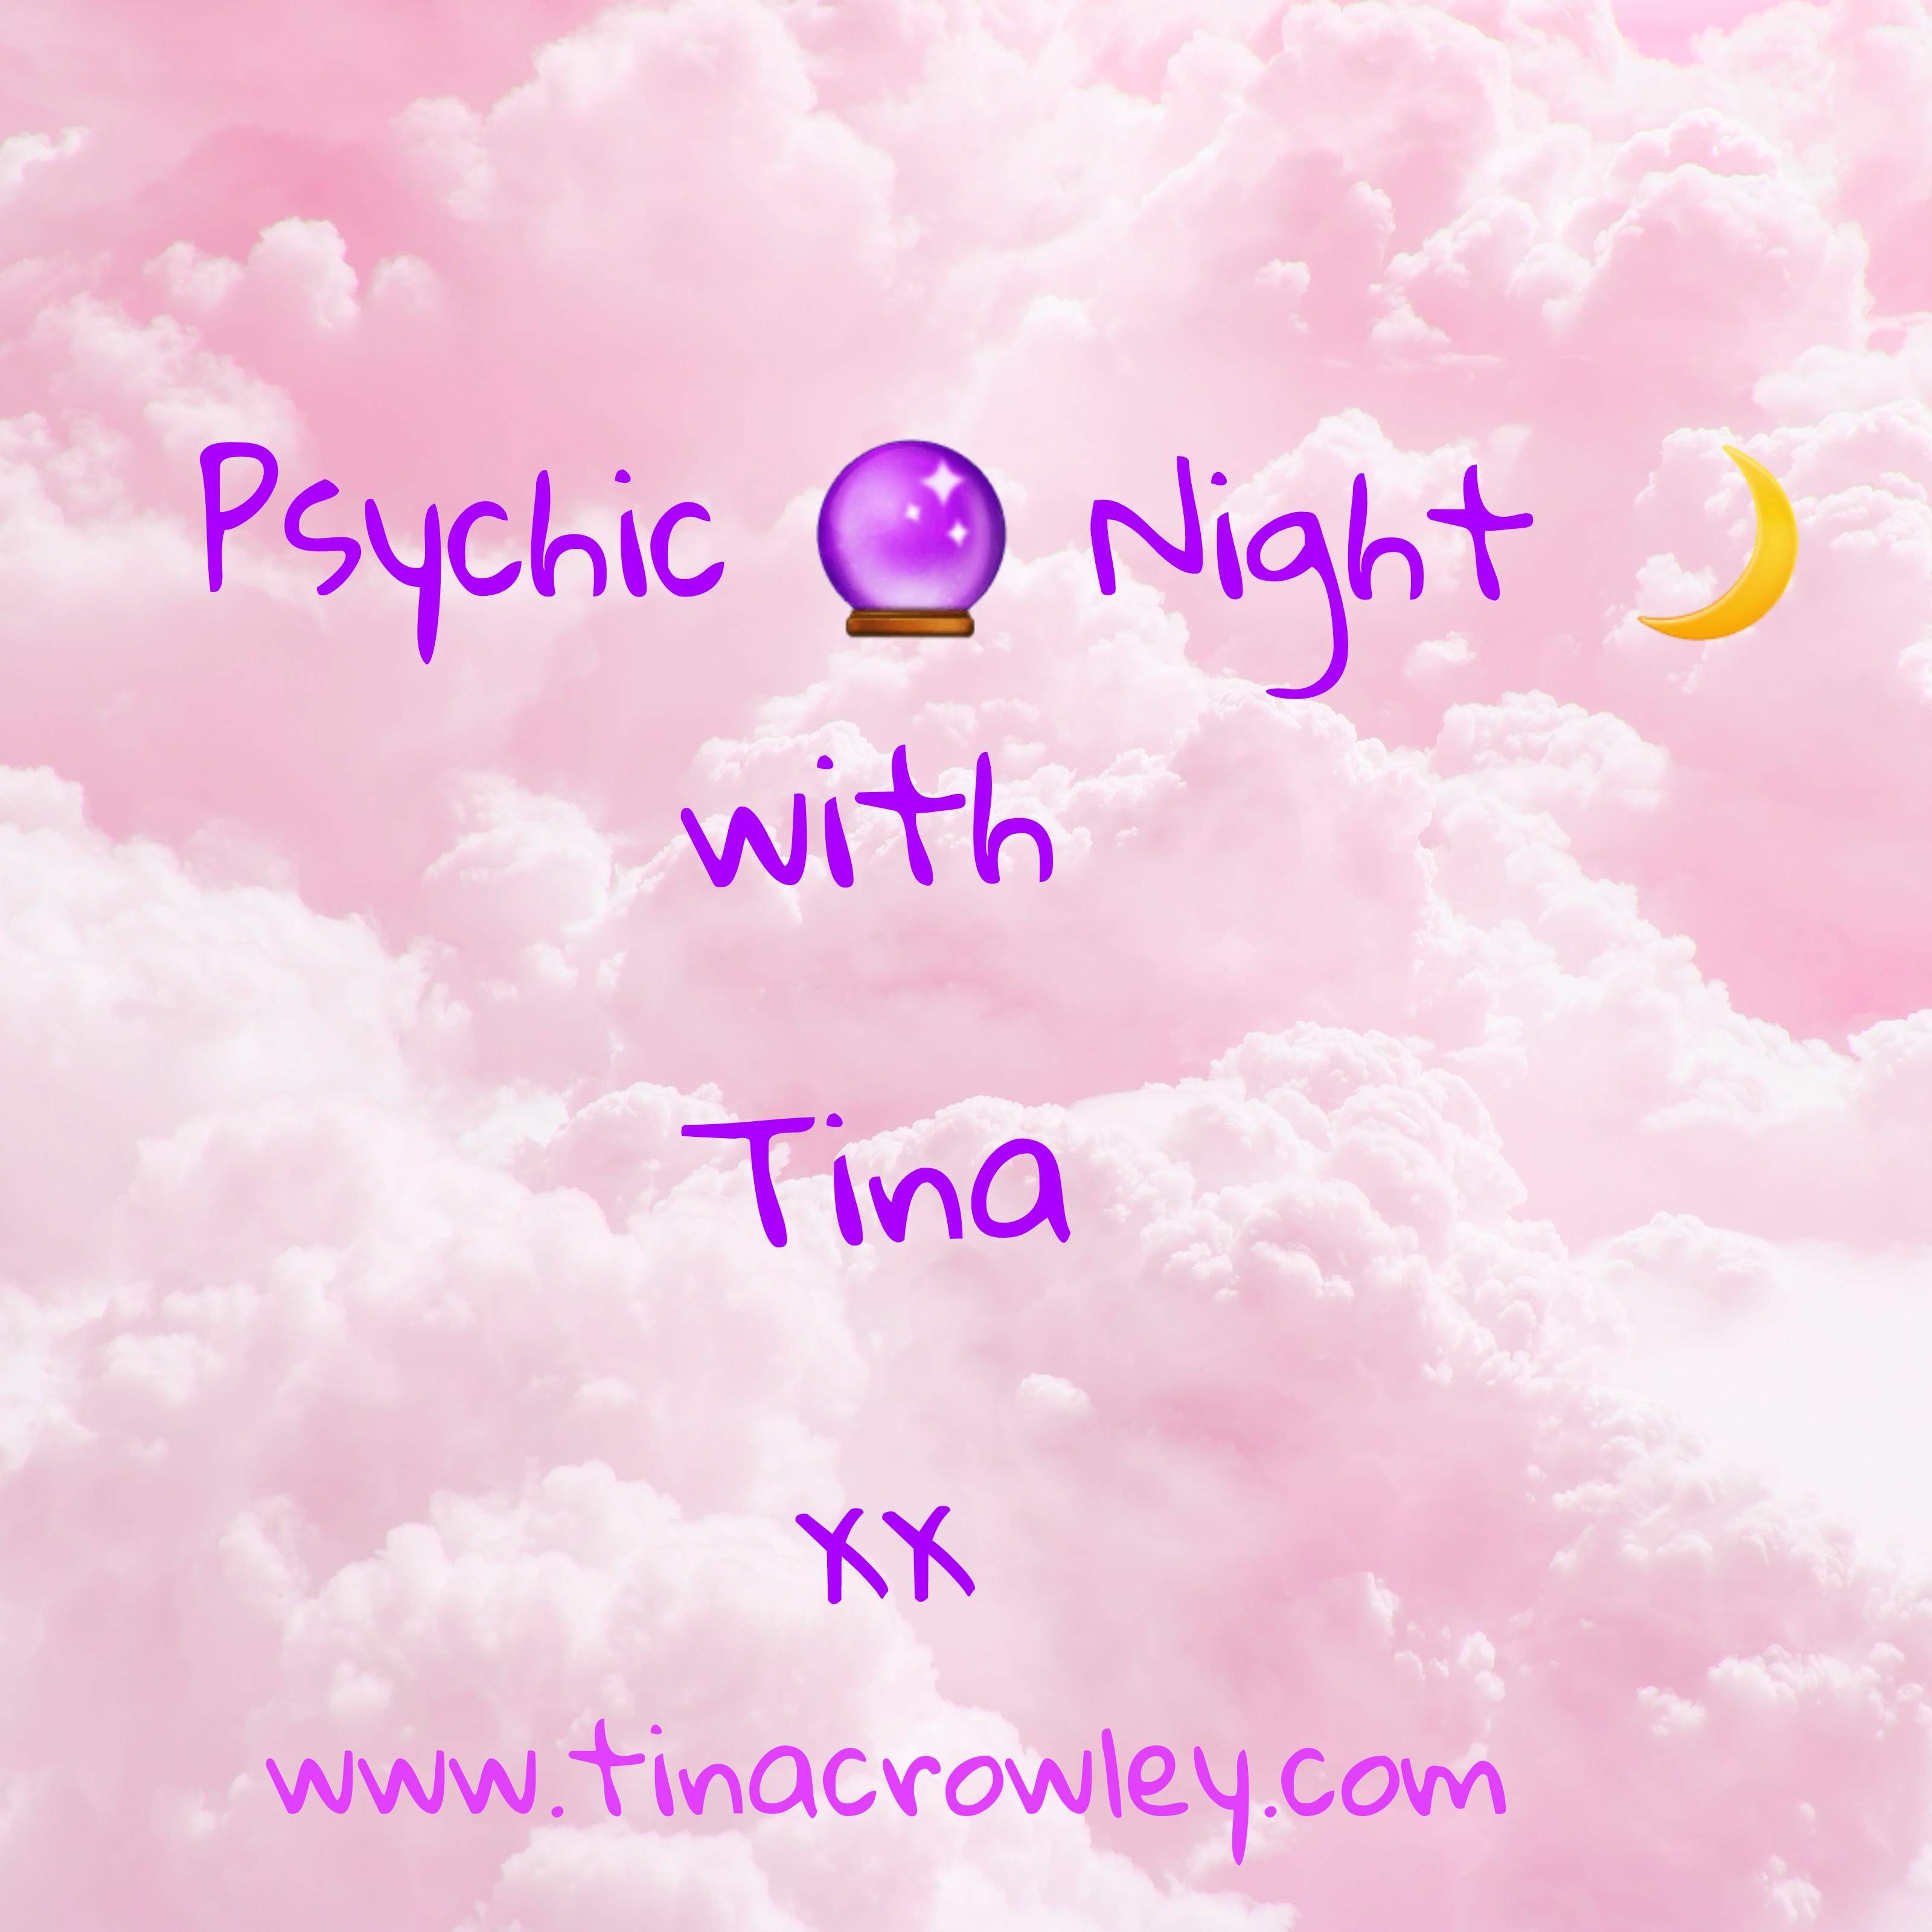 Book your own Psychic night with Tina